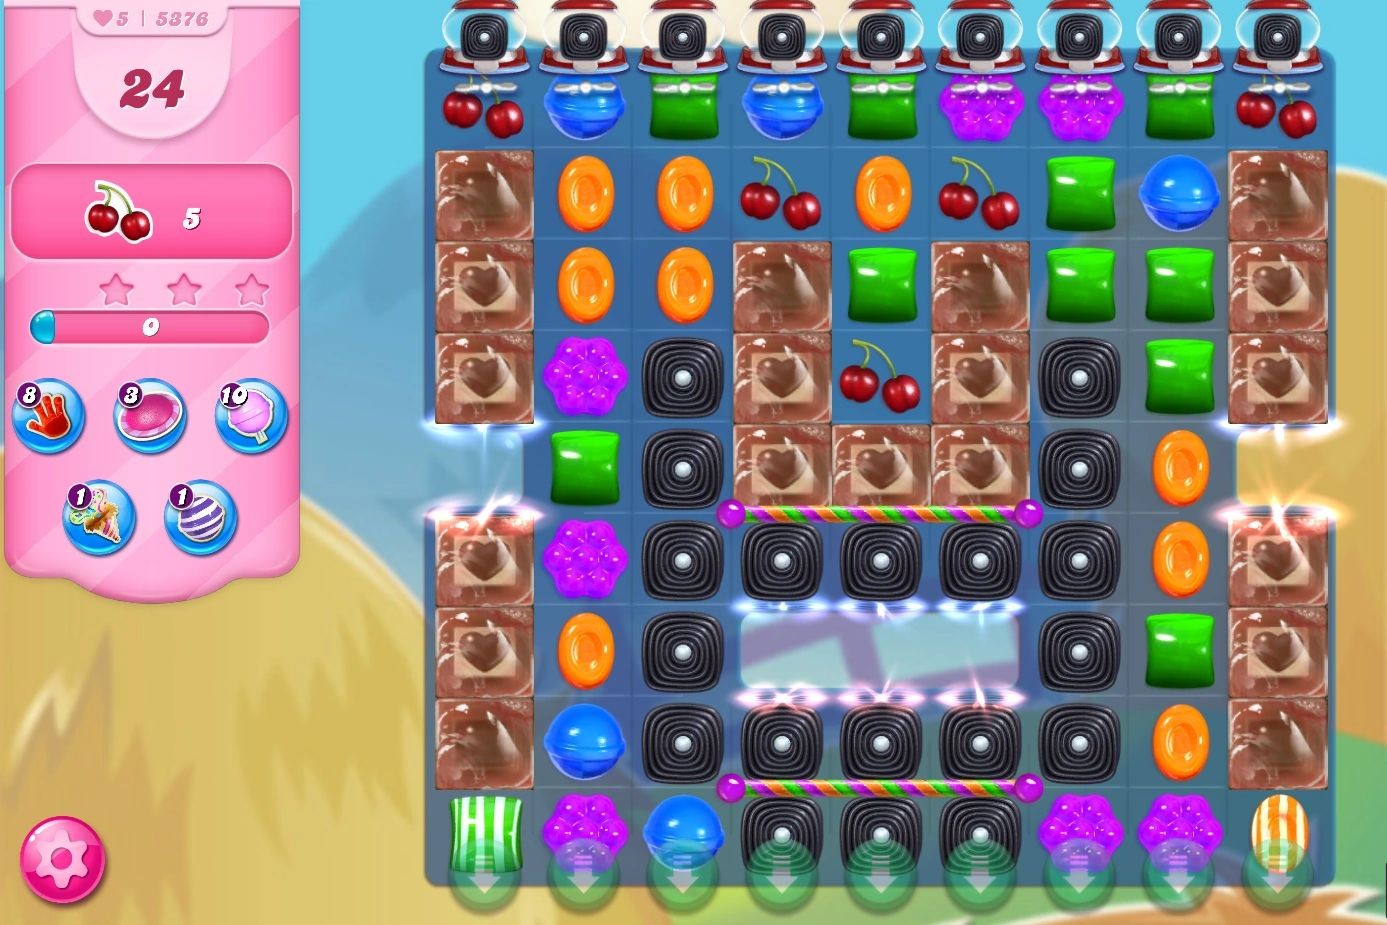 Candy crush levels with cherries